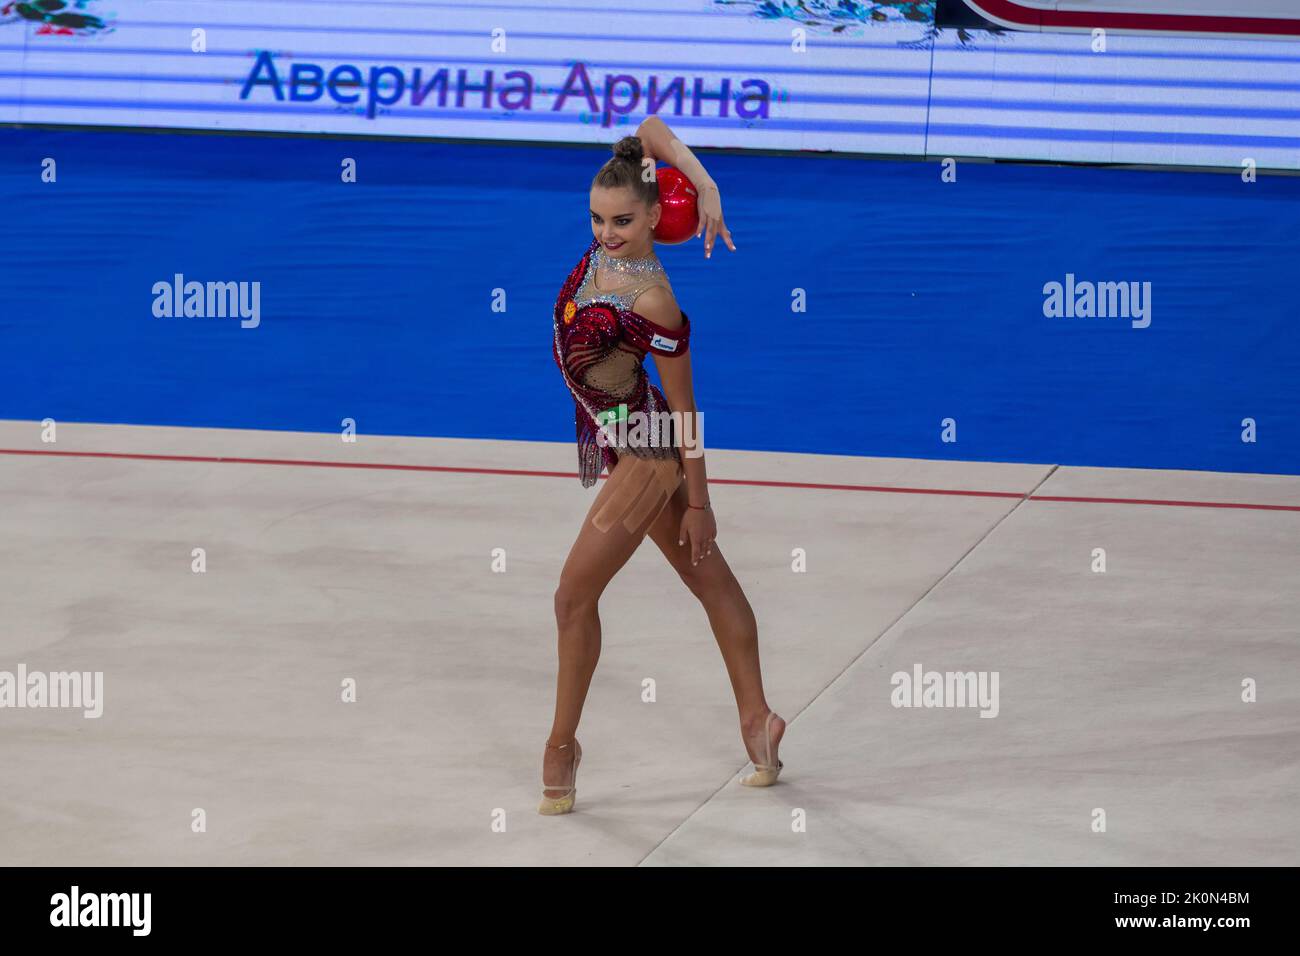 Moscow, Russia. 12th of September, 2022. Arina Averina performs her ball routine in a qualification at the 2022 All-Russian Summer Spartakiad in Rhythmic Gymnastics at Irina Viner-Usmanova Gymnastics Palace in Luzhniki in Moscow, Russia. Nikolay Vinokurov/Alamy Live News Stock Photo